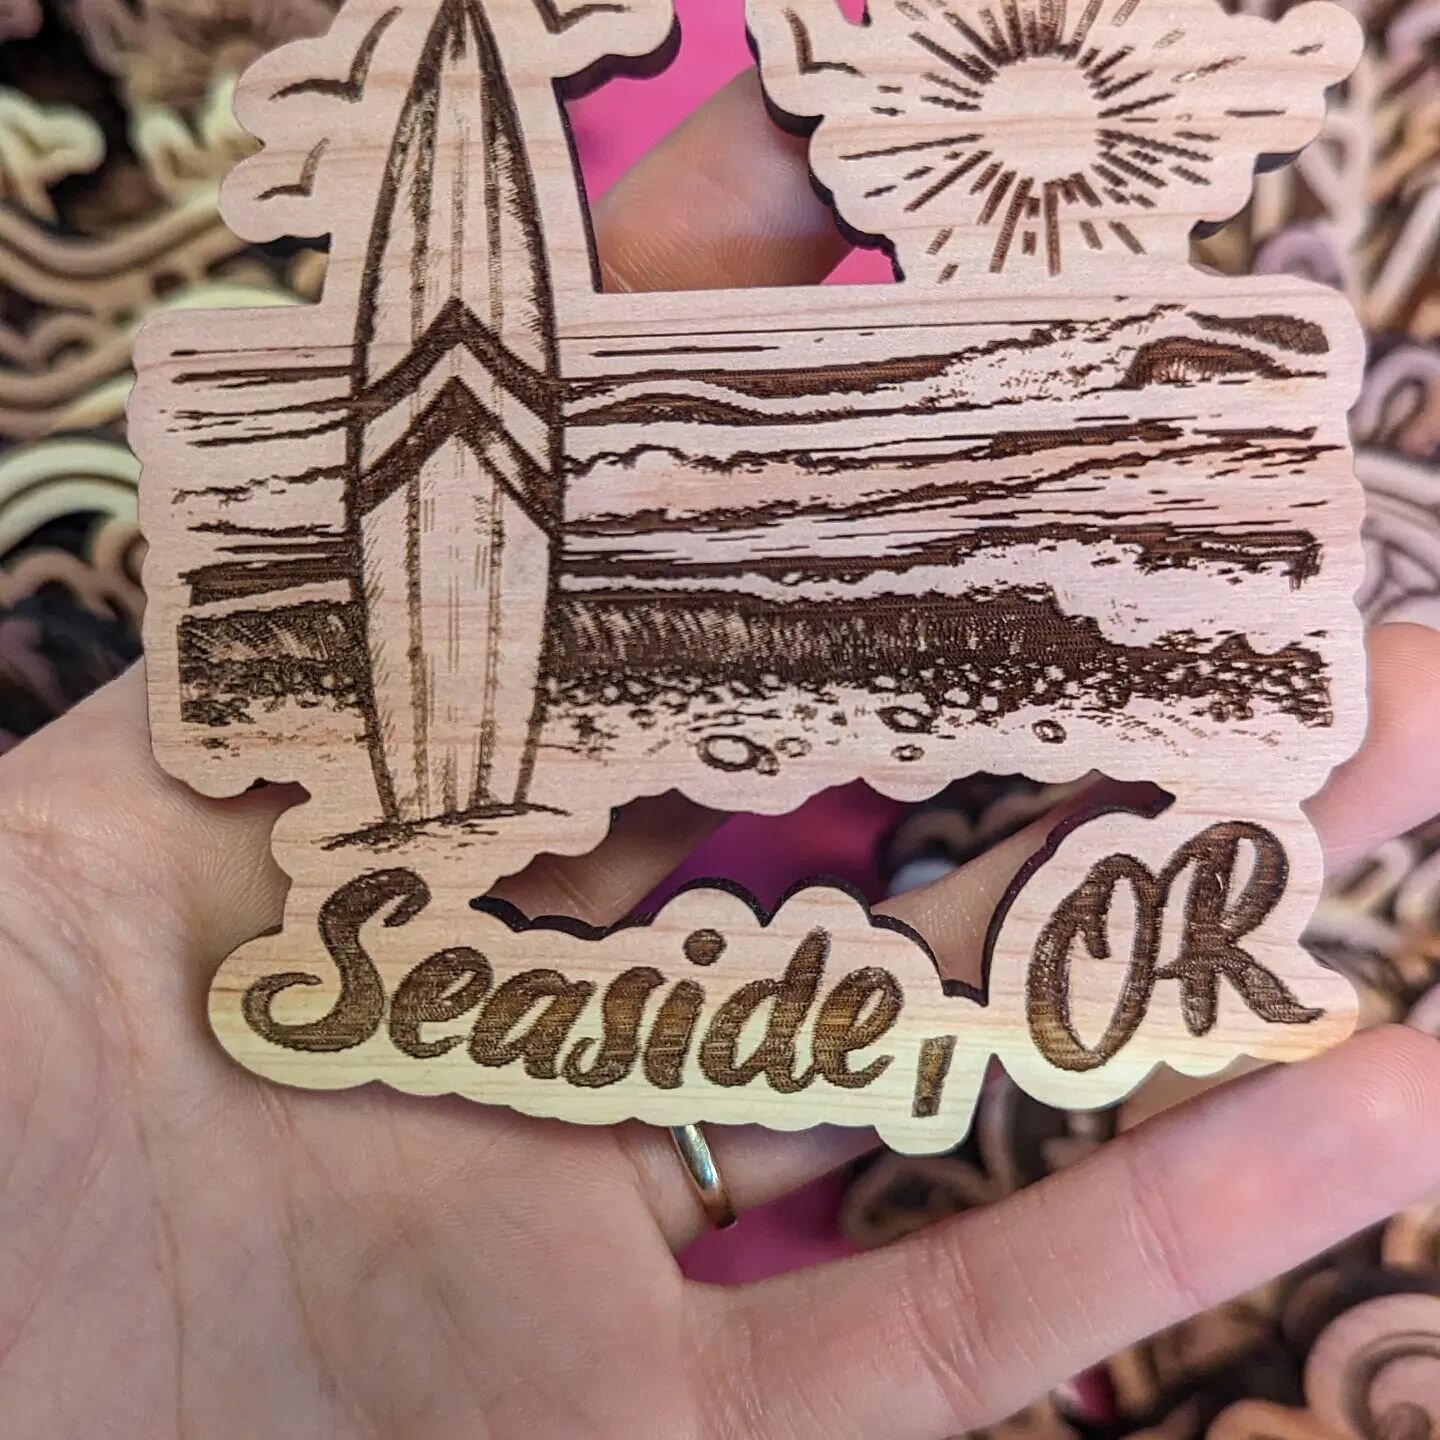 NEW PRODUCT! It's not food, but it smells so so good 🤩 because it's cedarwood! Made in Seaside, PNW theme magnets!
.
#pnw #pnwmade #pnwonderland #oregonmade #downtownseaside #shopsmall #shoplocal #cedar #cedarwood #madeinseaside #magnet #souvenir #b